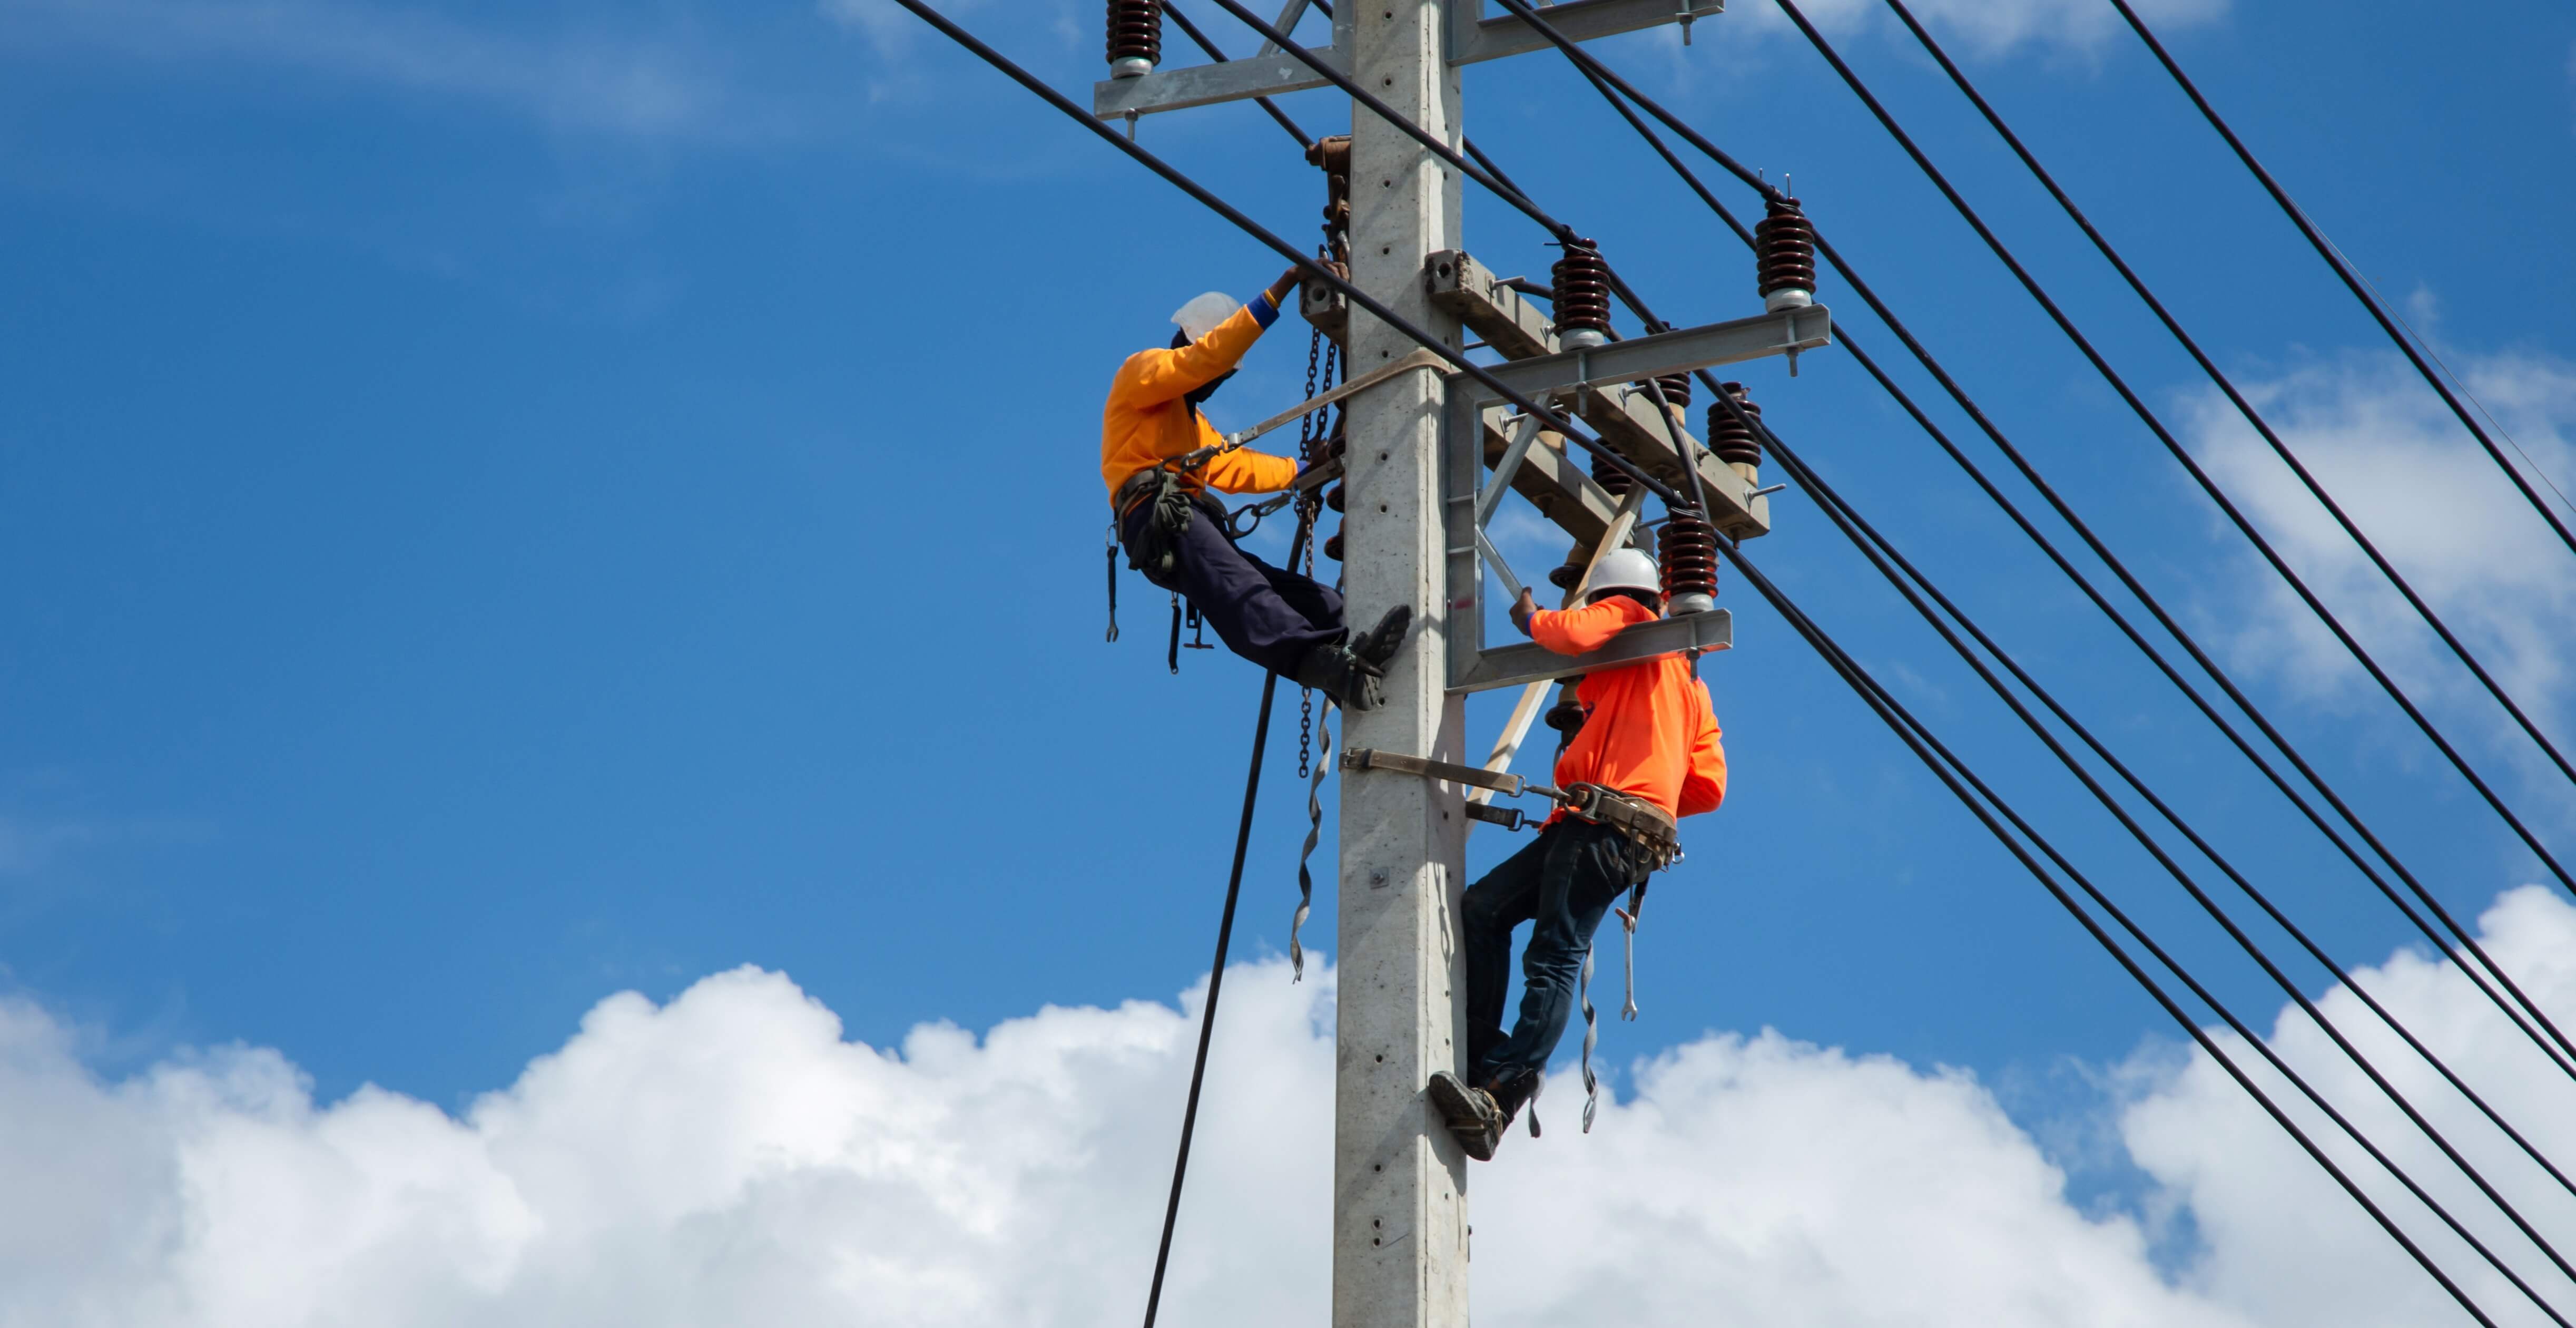 Two electricians work on a power line while tethered to a tall utility pole.